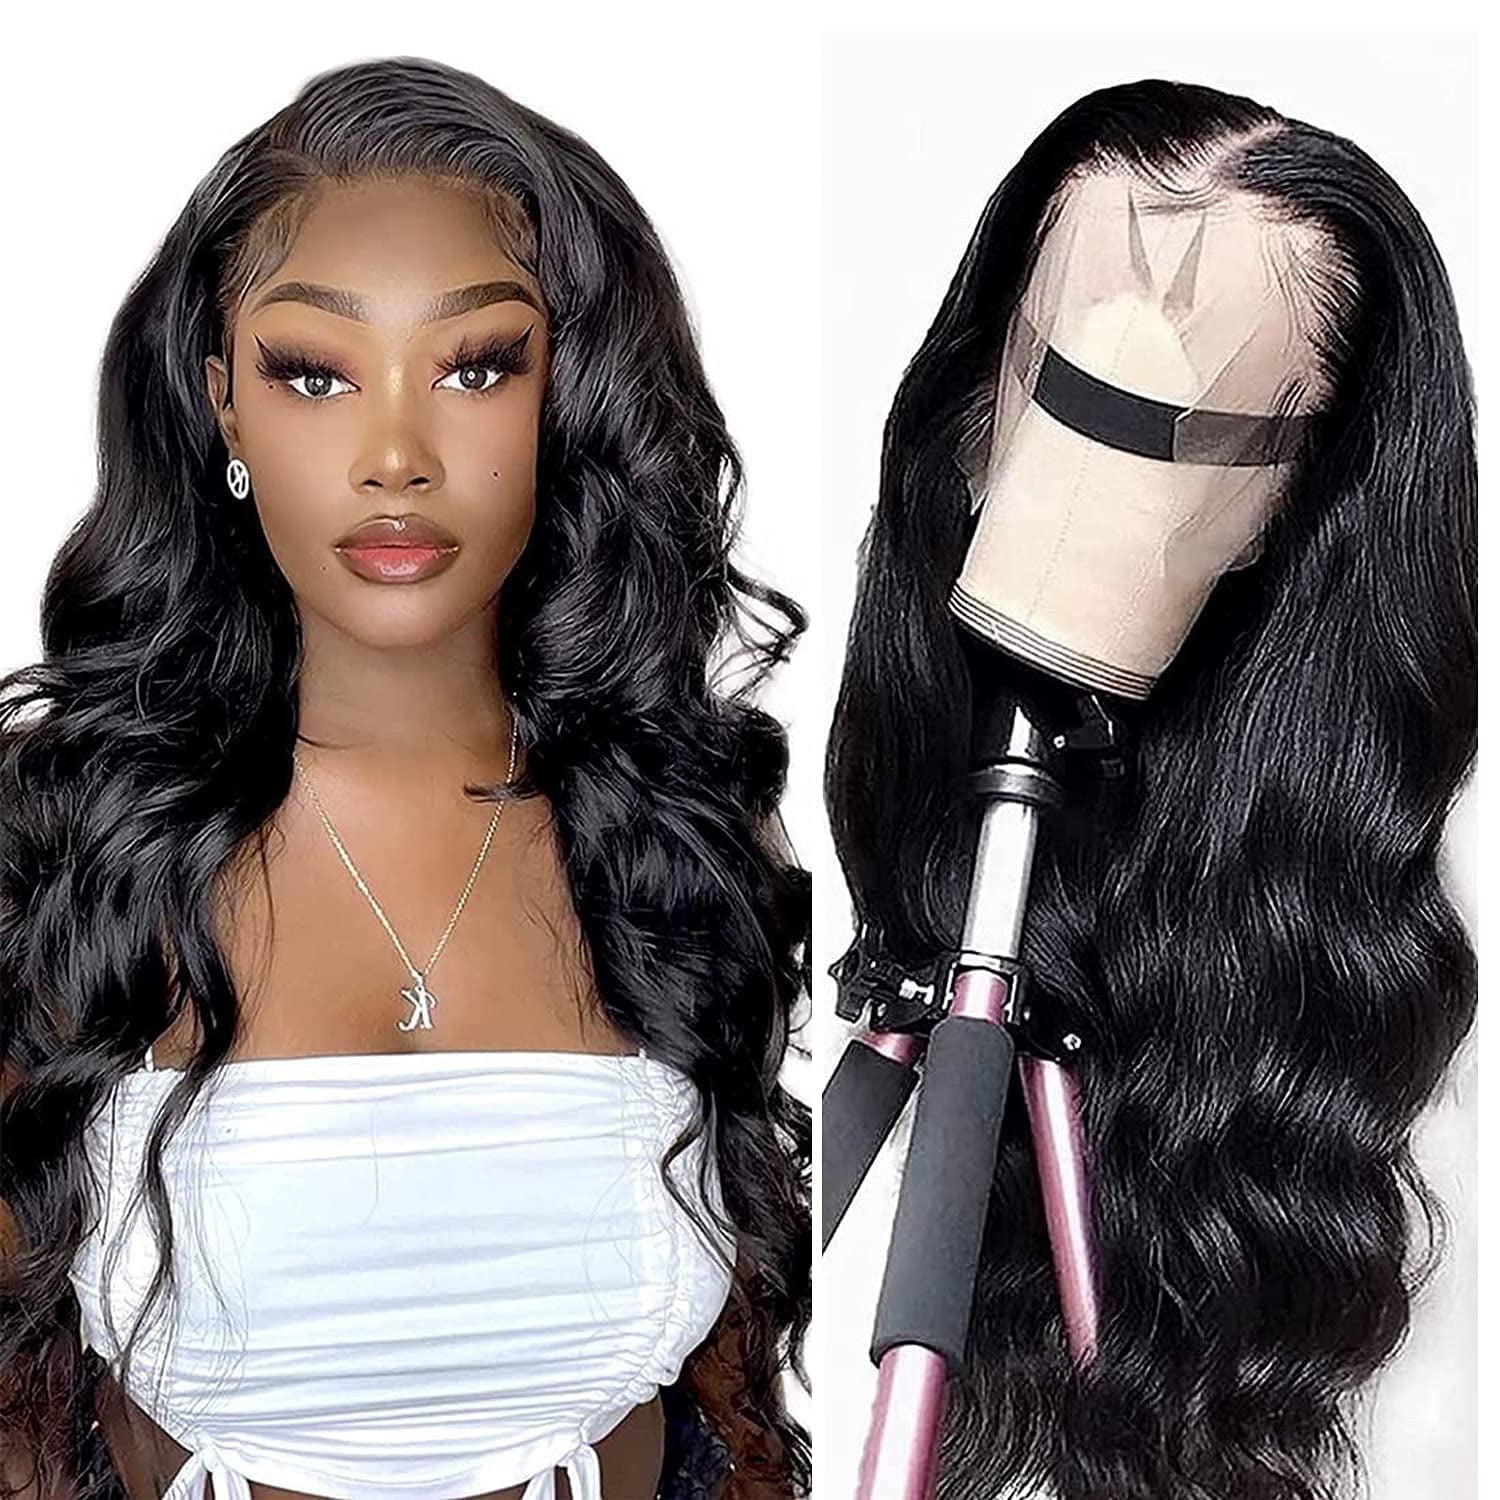 Beautyforever Body Wave Gray Purple Sandy Highlight 13x4 Lace Front Wigs